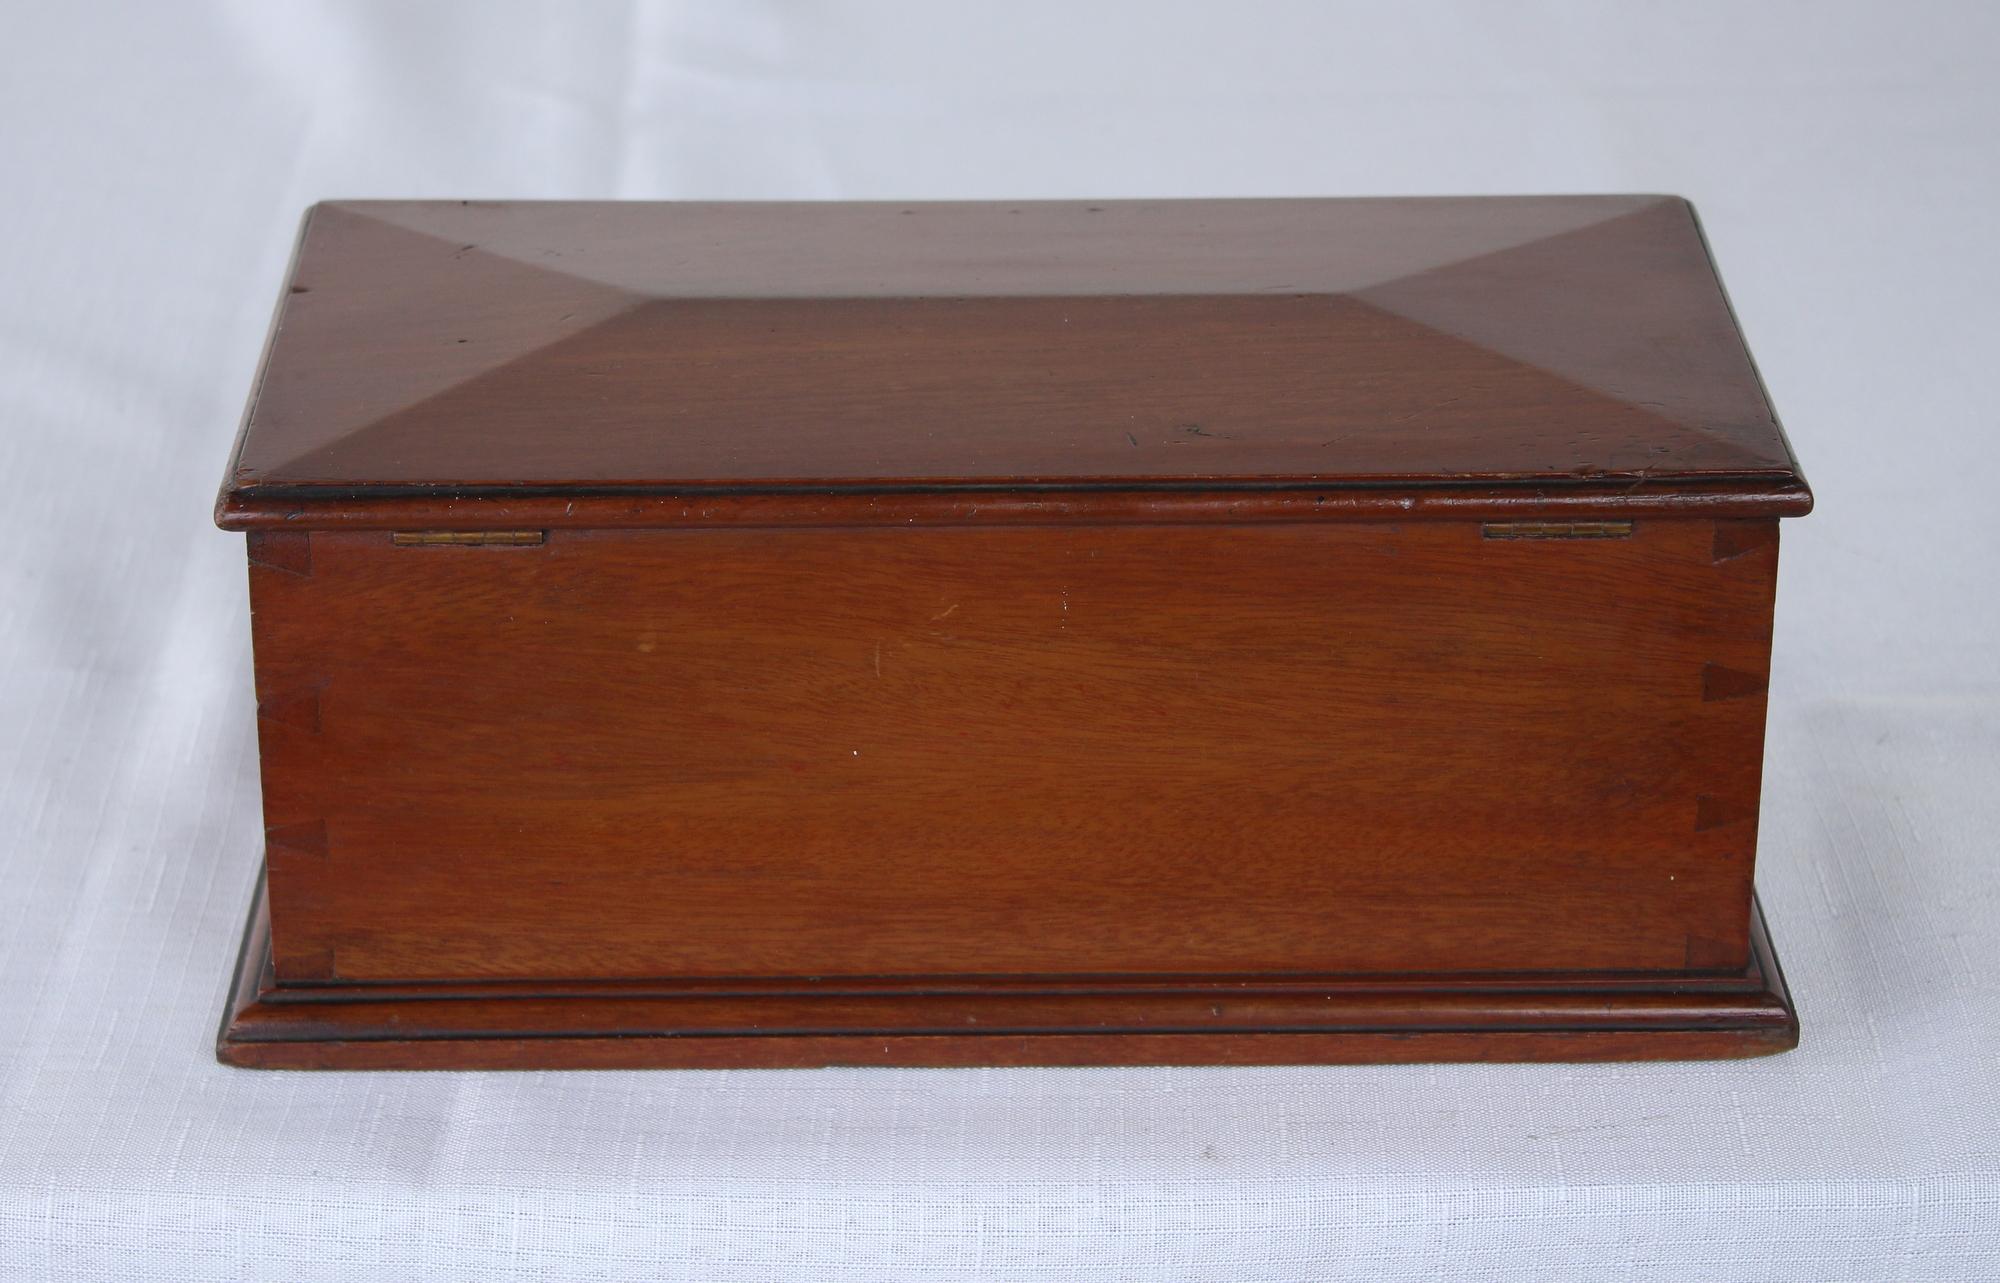 English Antique Mahogany Jewelry Box with Shaped Top